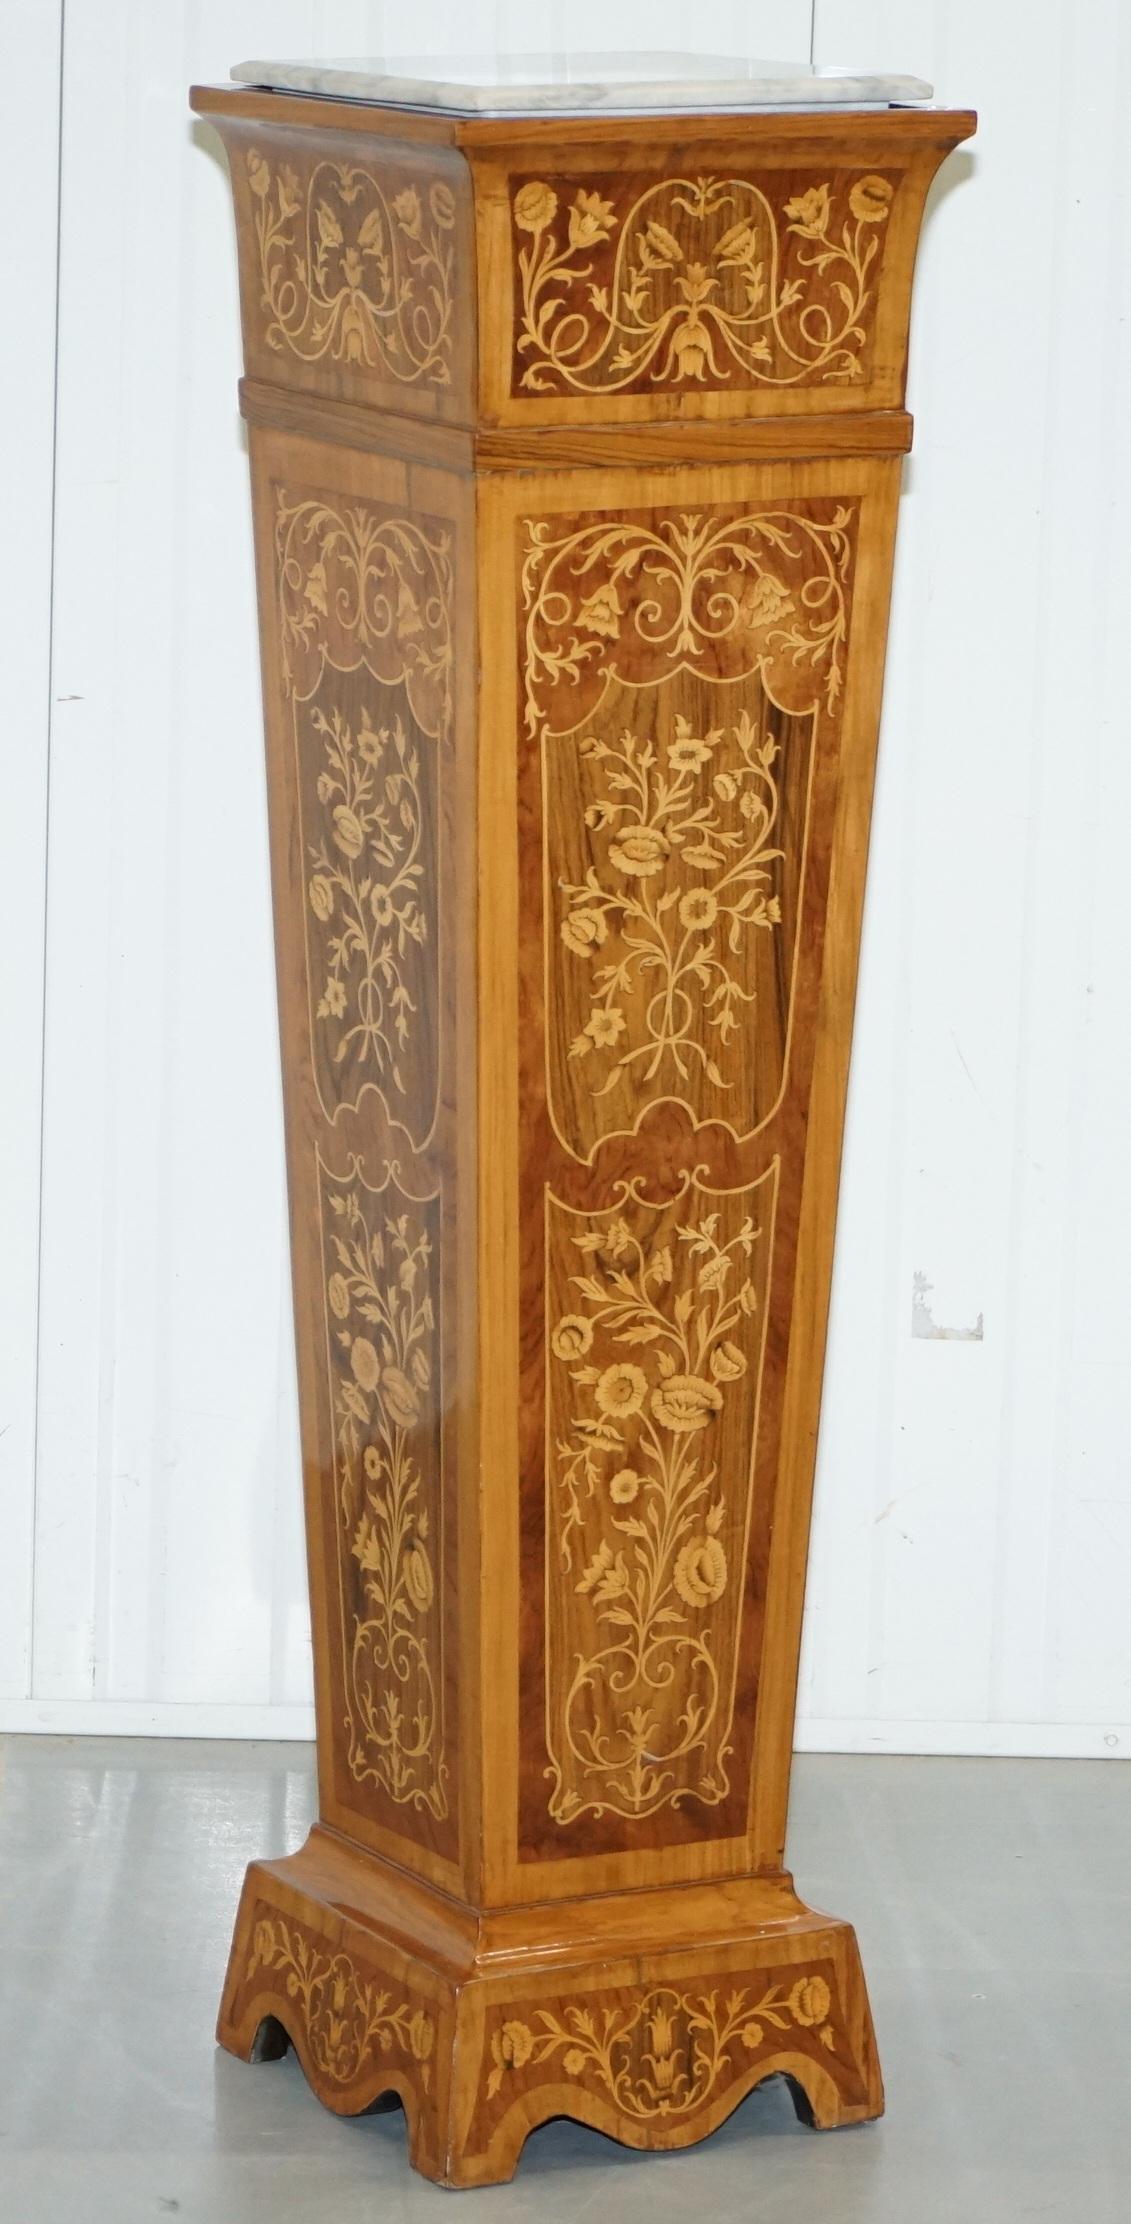 We are delighted to offer for sale this near pair, of Dutch style Marquetry inlaid rosewood and kingwood with marble tops jardinière stands

Please note the delivery fee listed is just a guide, it covers within the M25 only

A good looking and